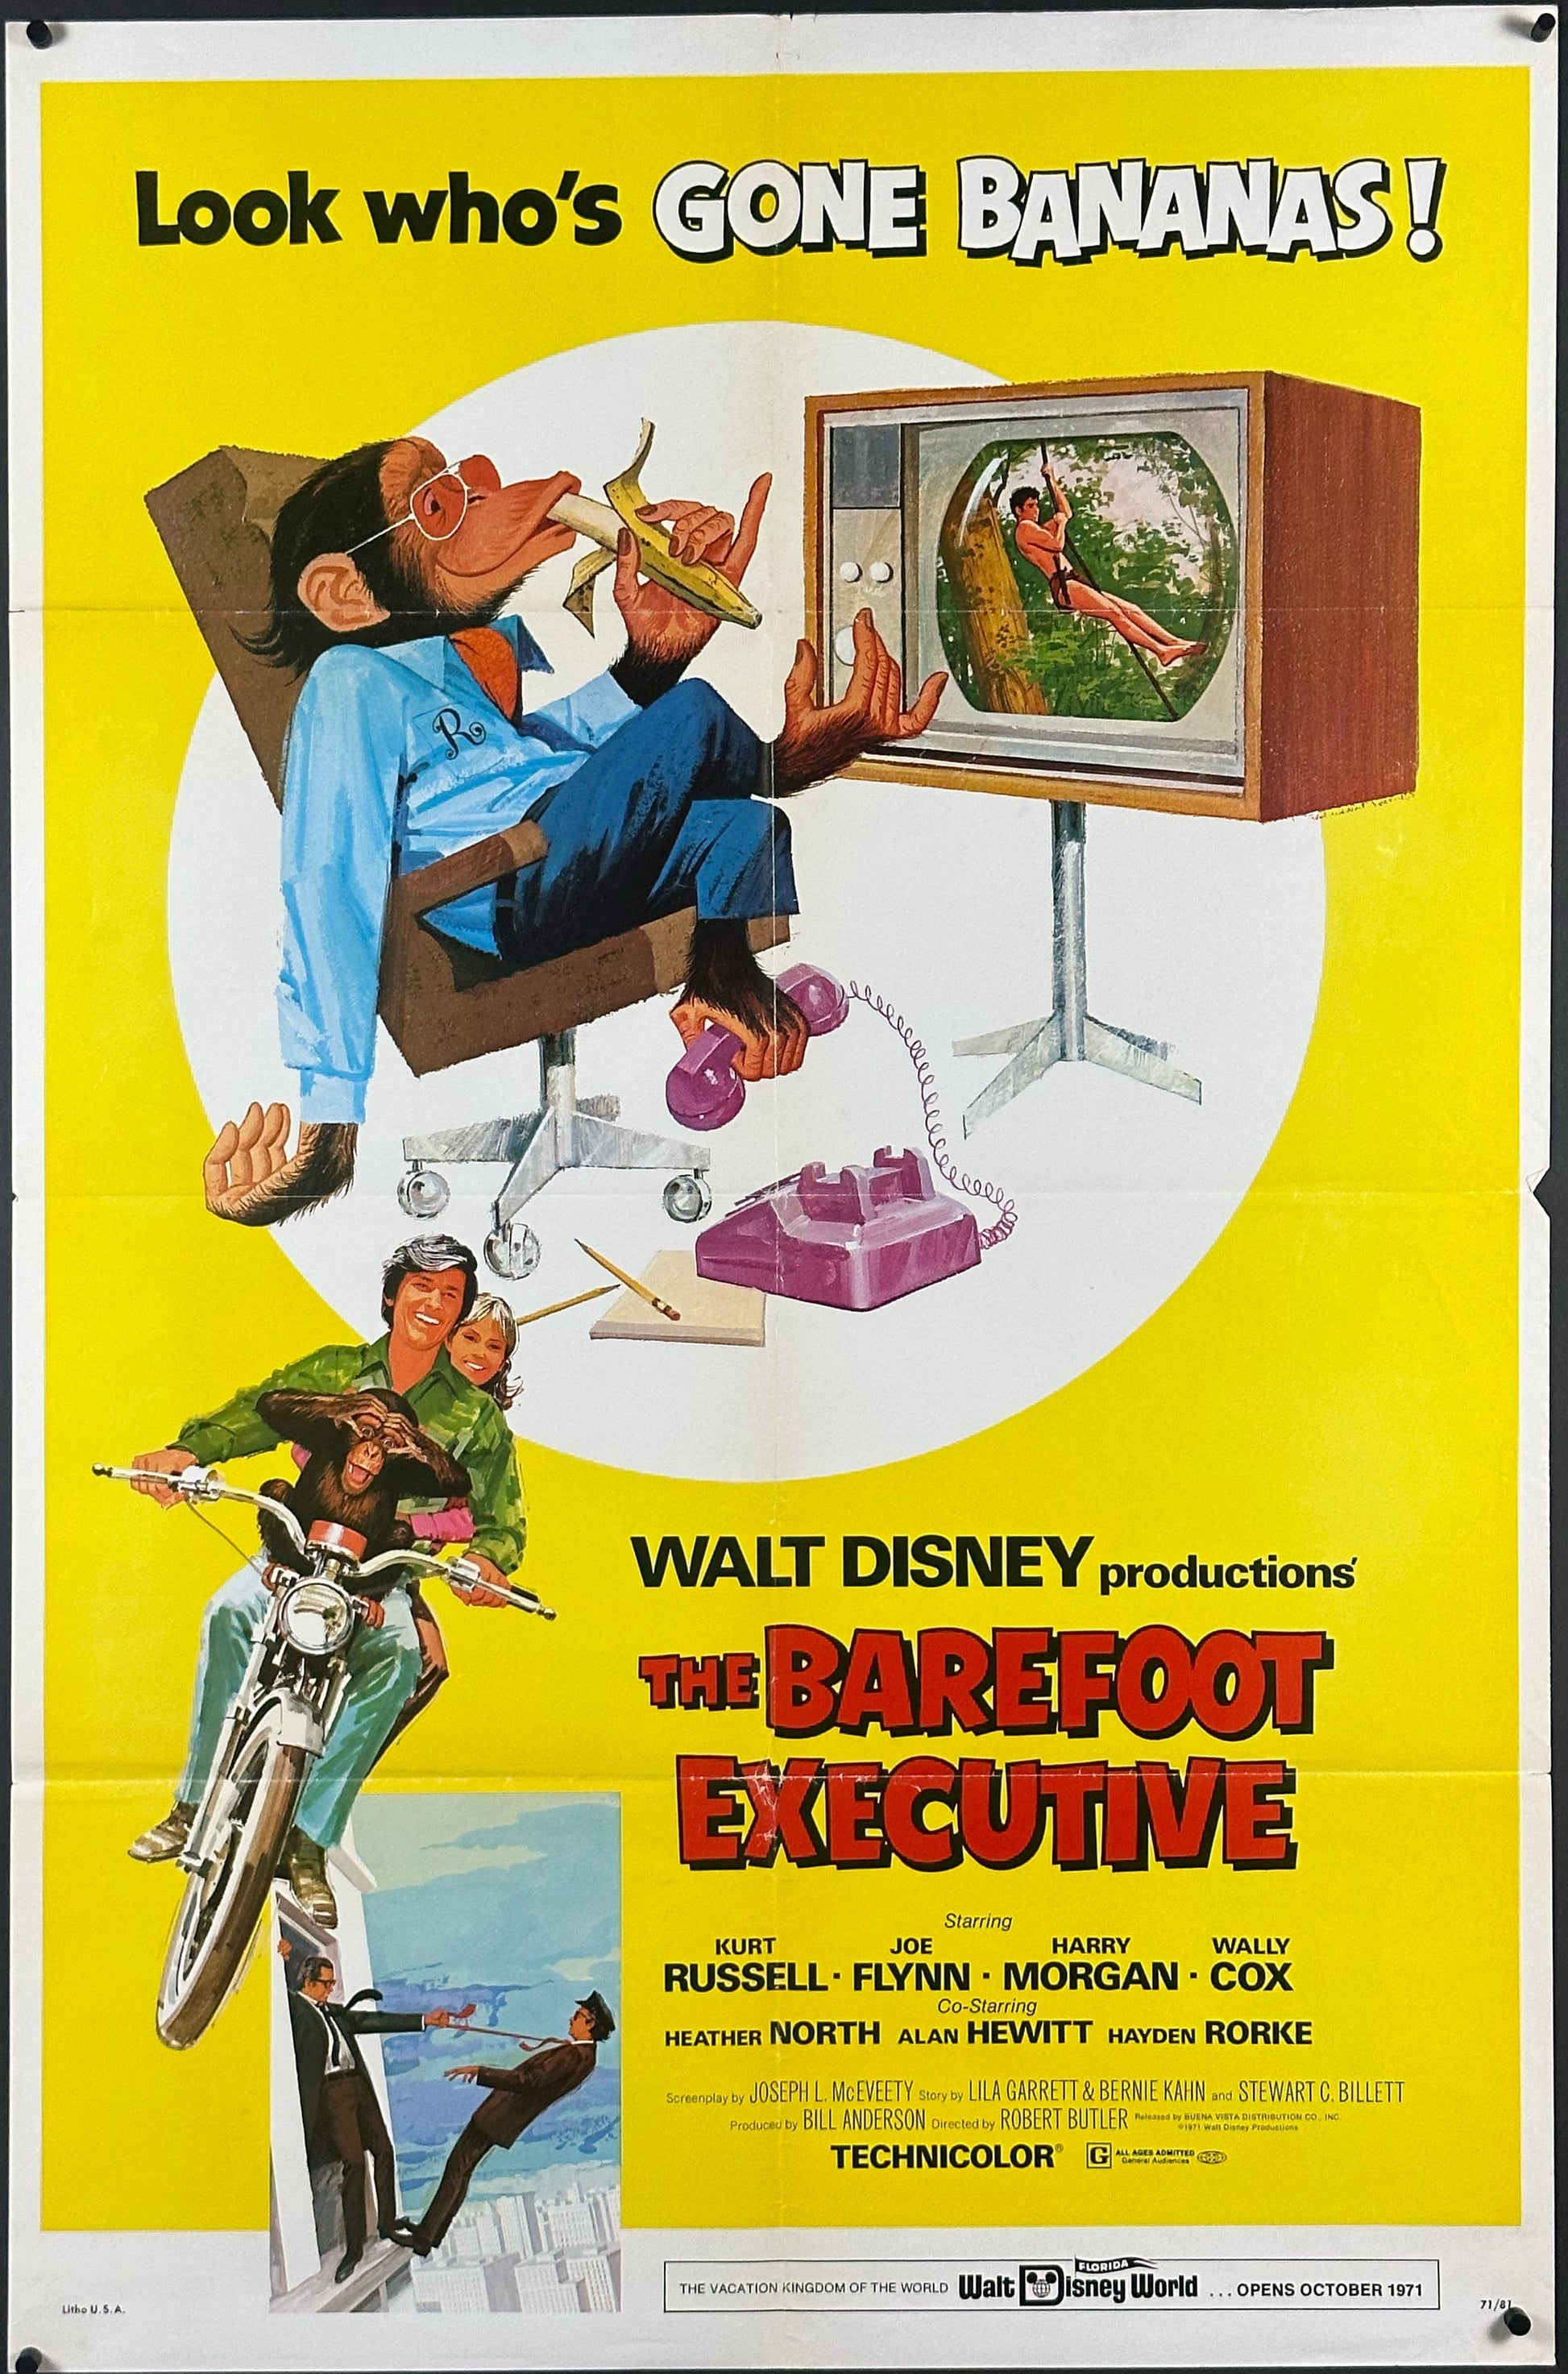 The Barefoot Executive - posterpalace.com